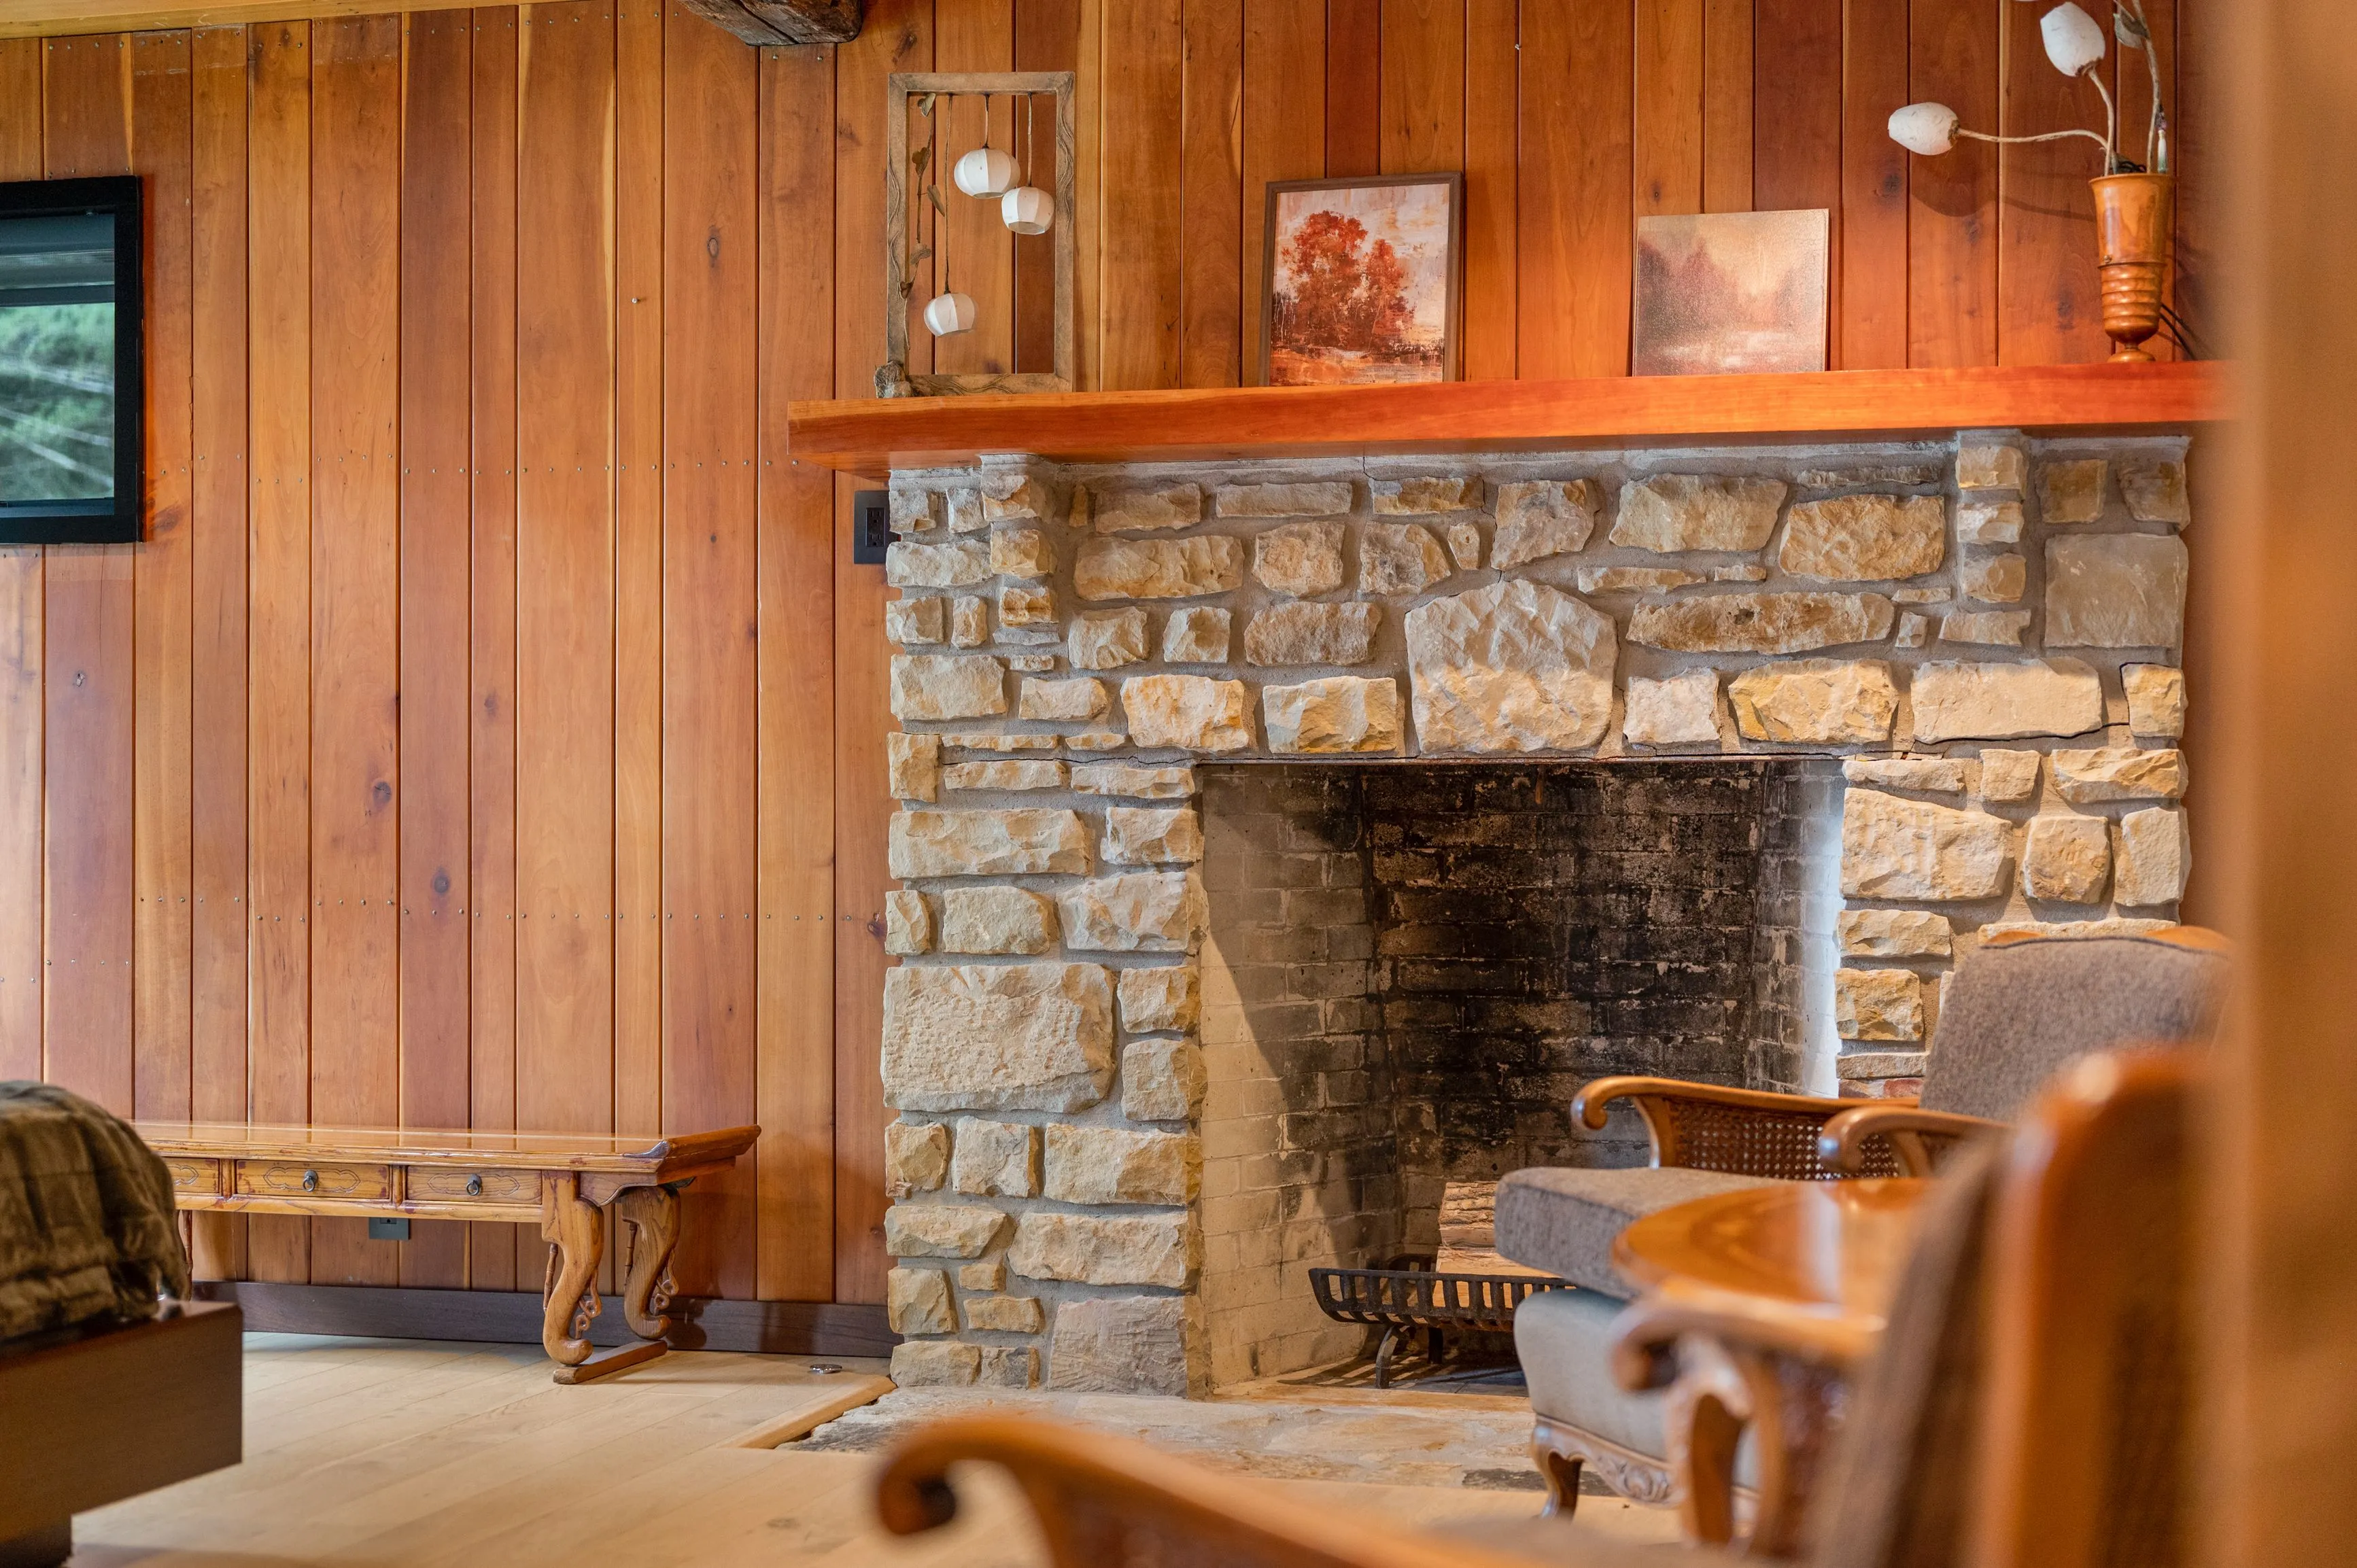 Cozy cabin interior with wooden walls, a stone fireplace, and traditional furniture.